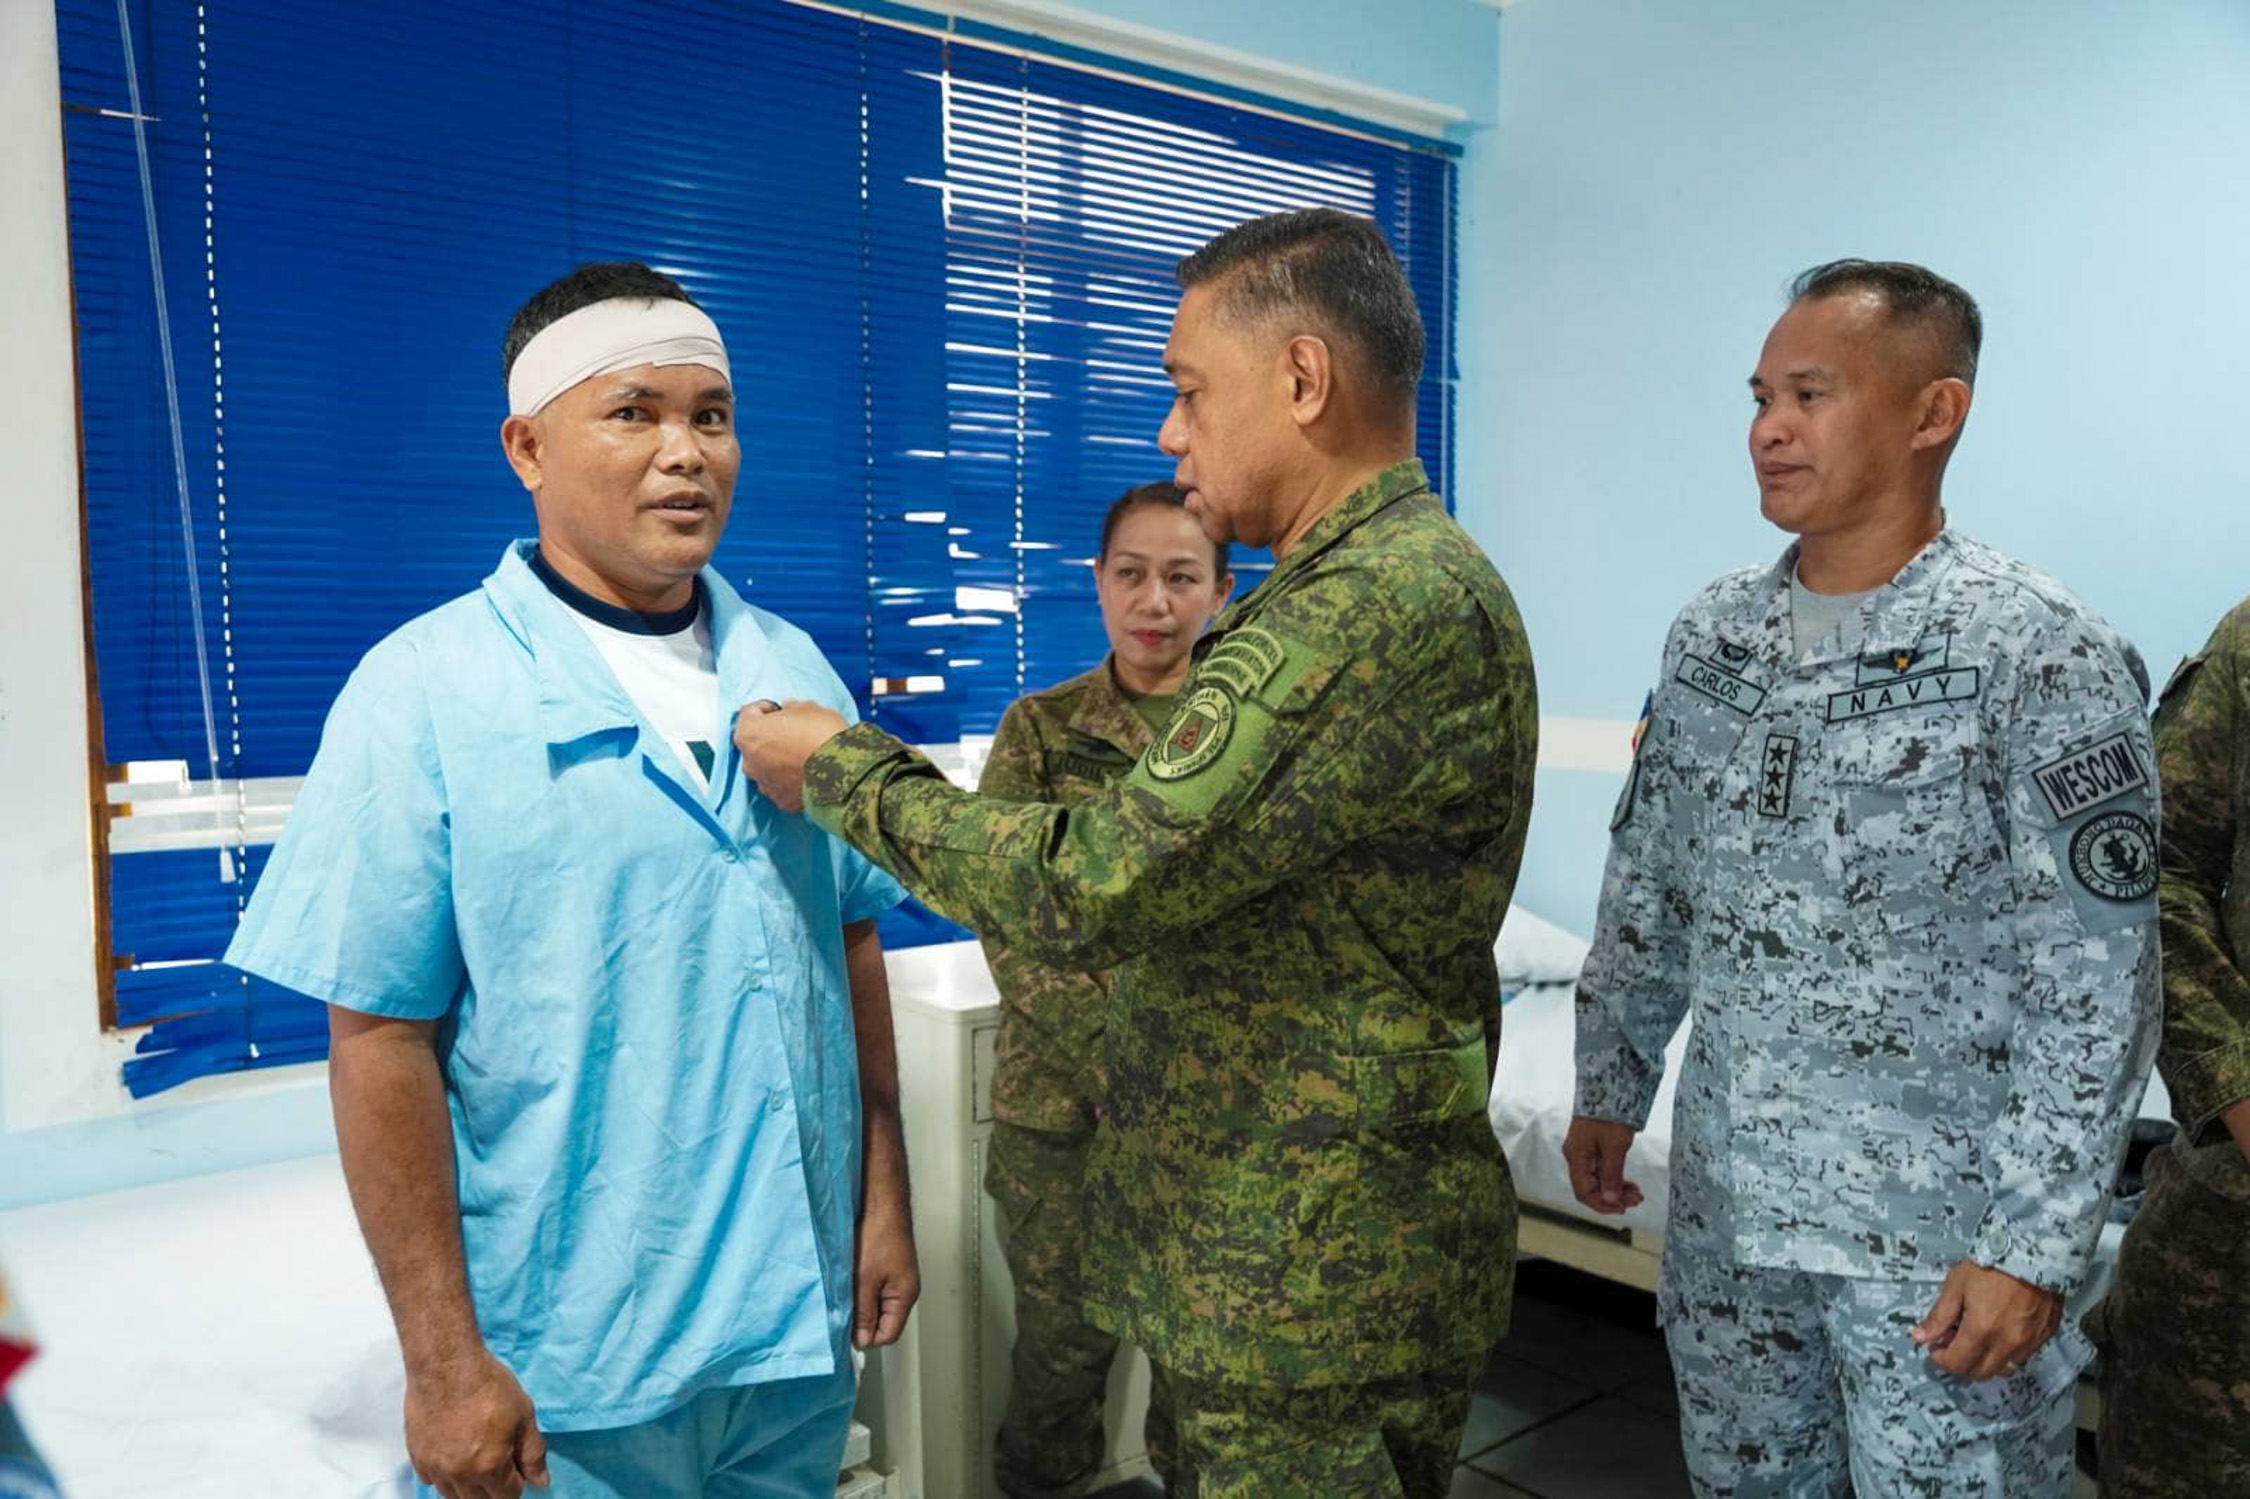 One of the Navy personnel injuredin the March 23 water cannon attack receives a medal from Gen. Romeo Brawner Jr.